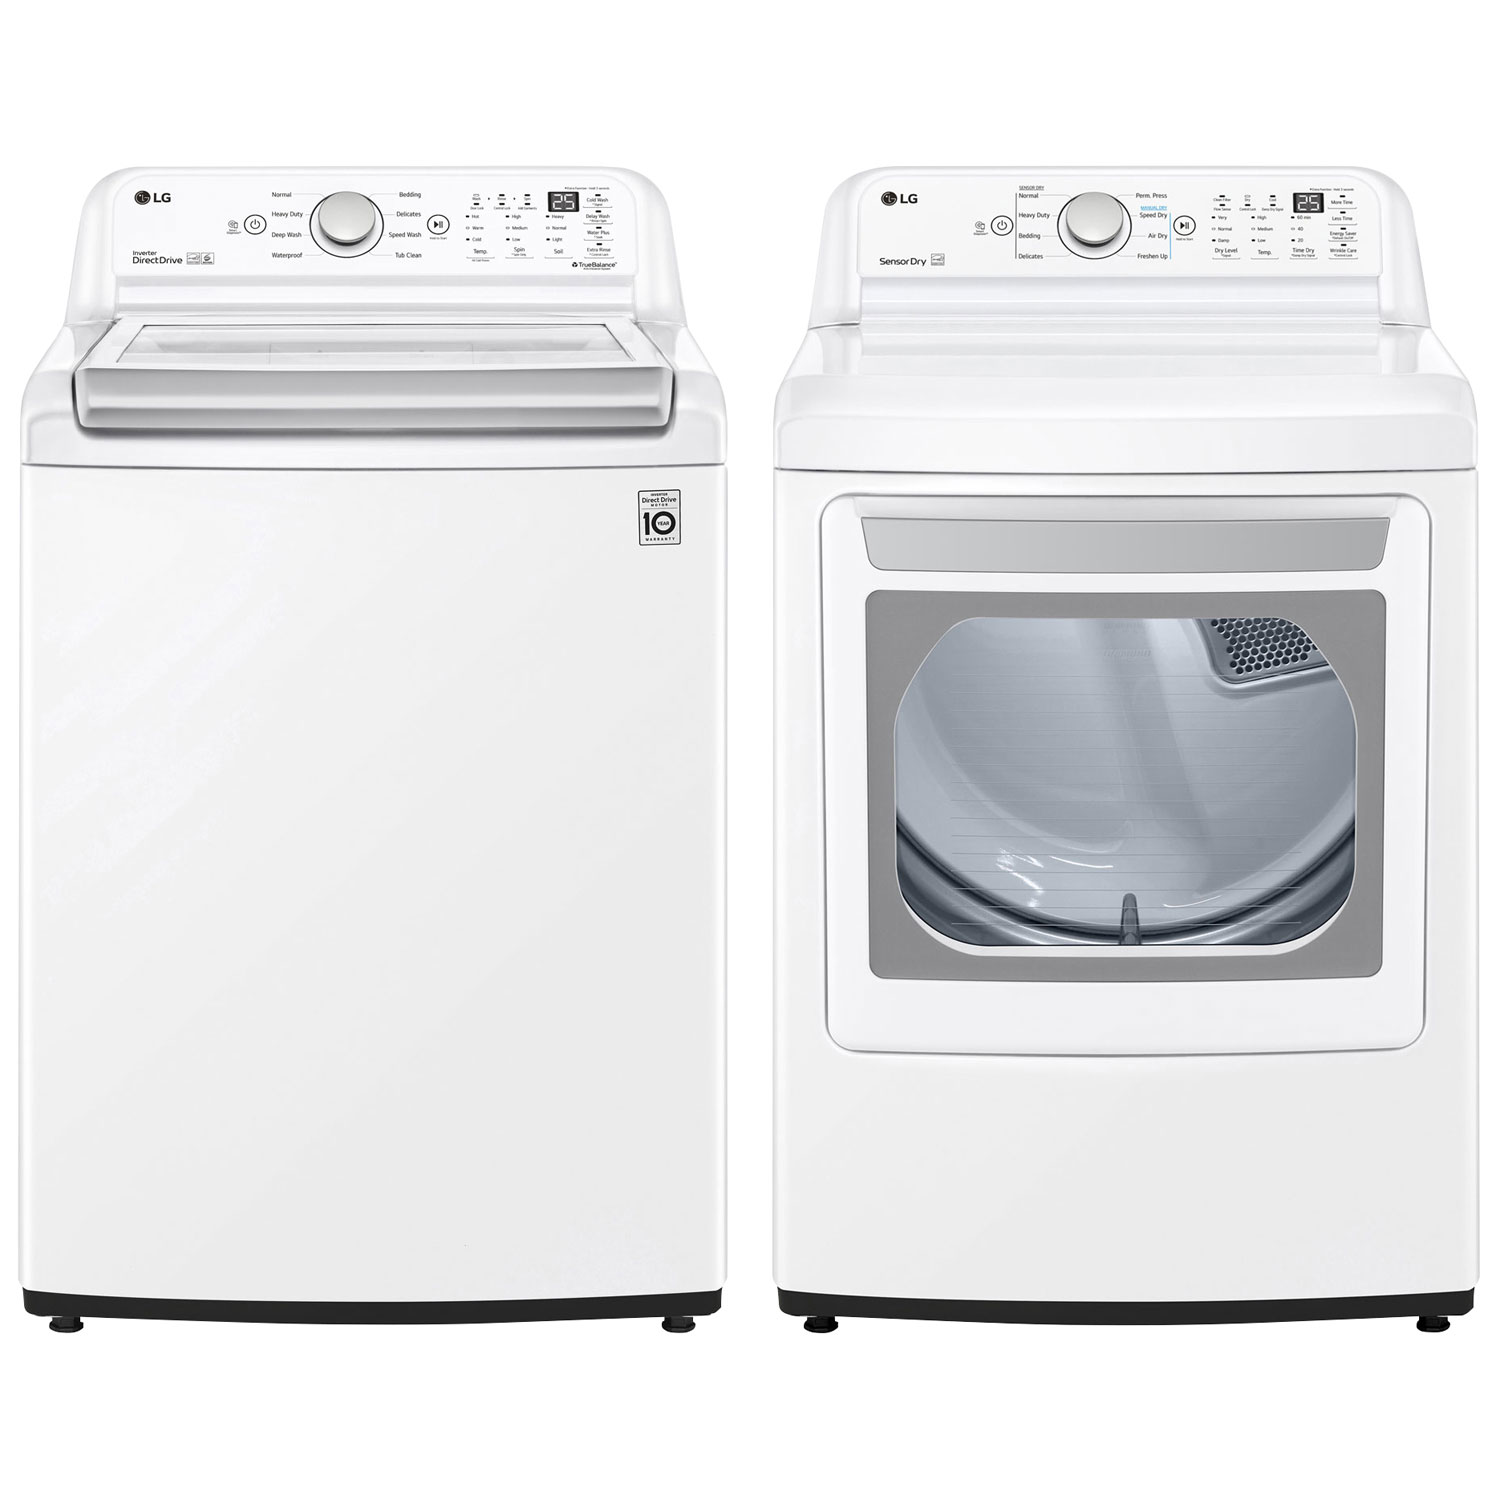 LG 5.8 Cu. Ft. HE Top Load Washer & 7.4 Cu. Ft. Electric Dryer - White